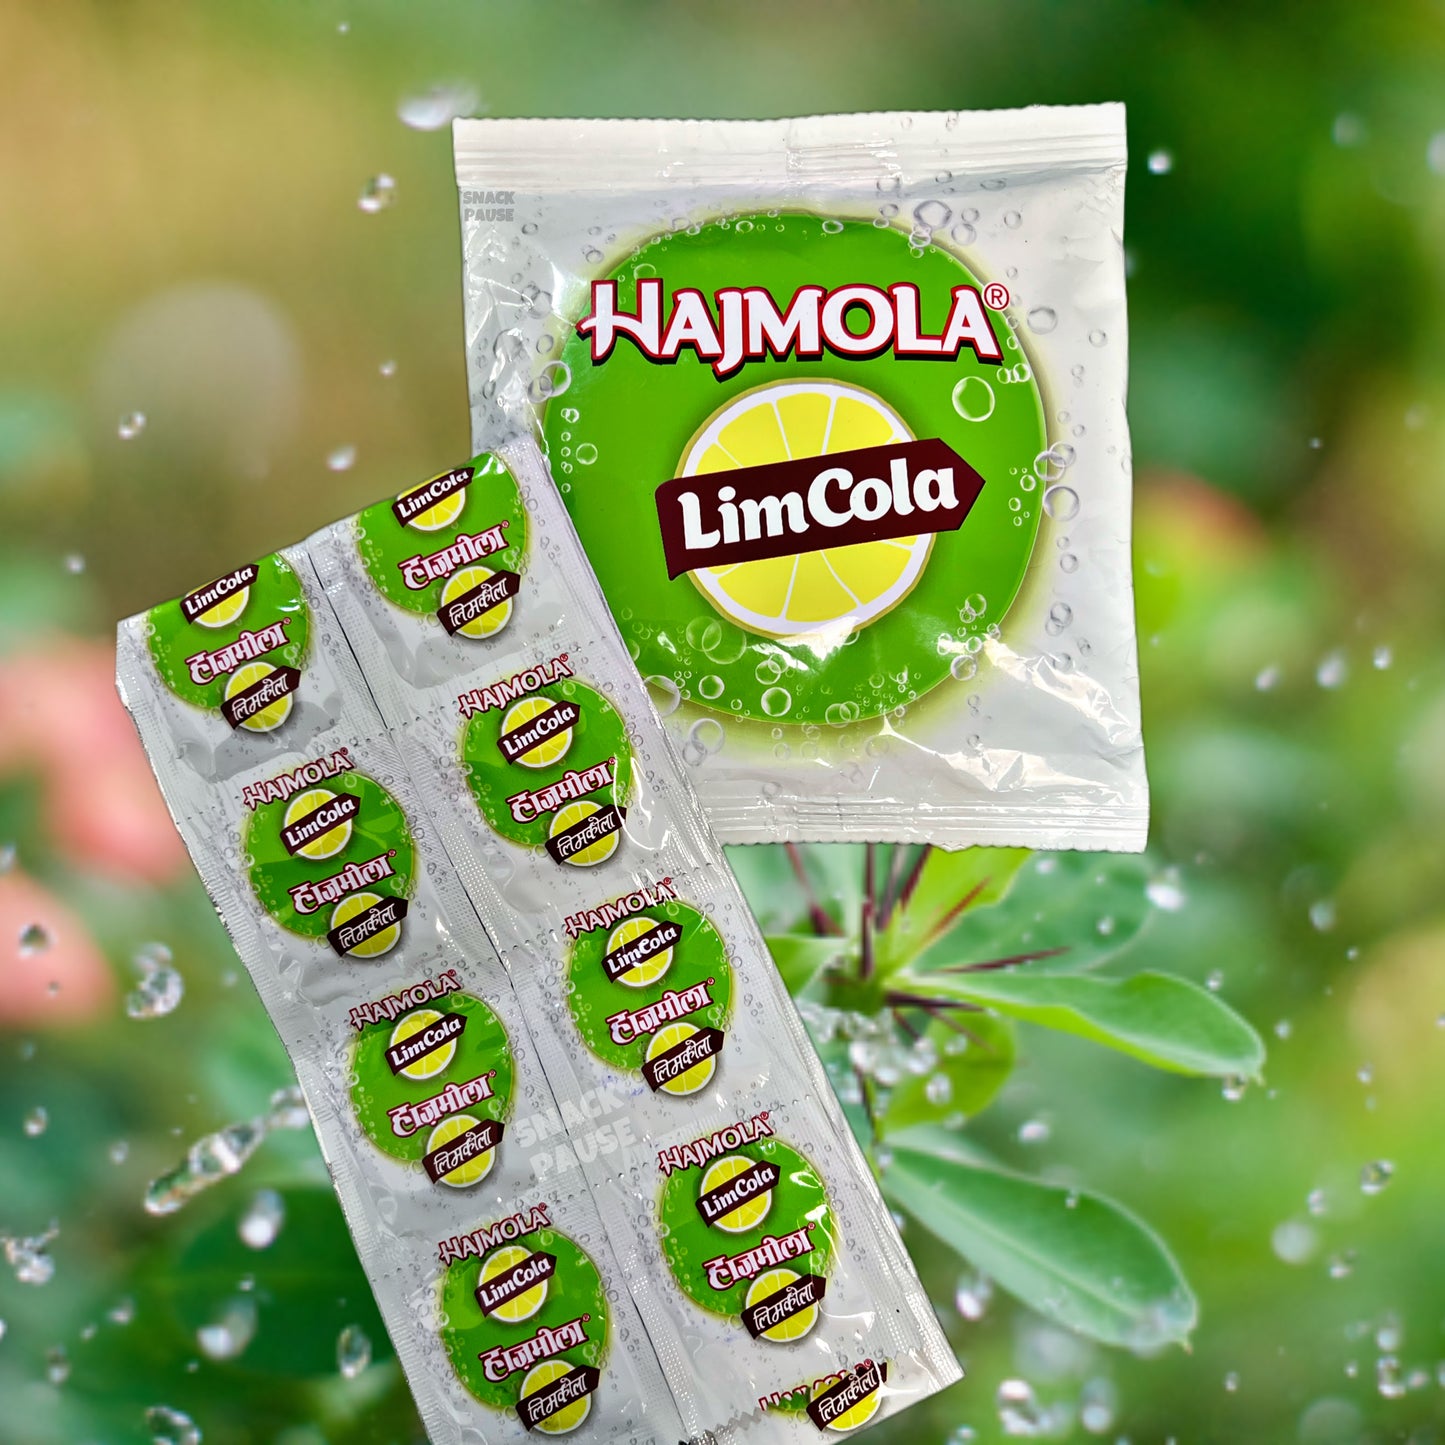 Hajmola LimCola | The Snack Pause